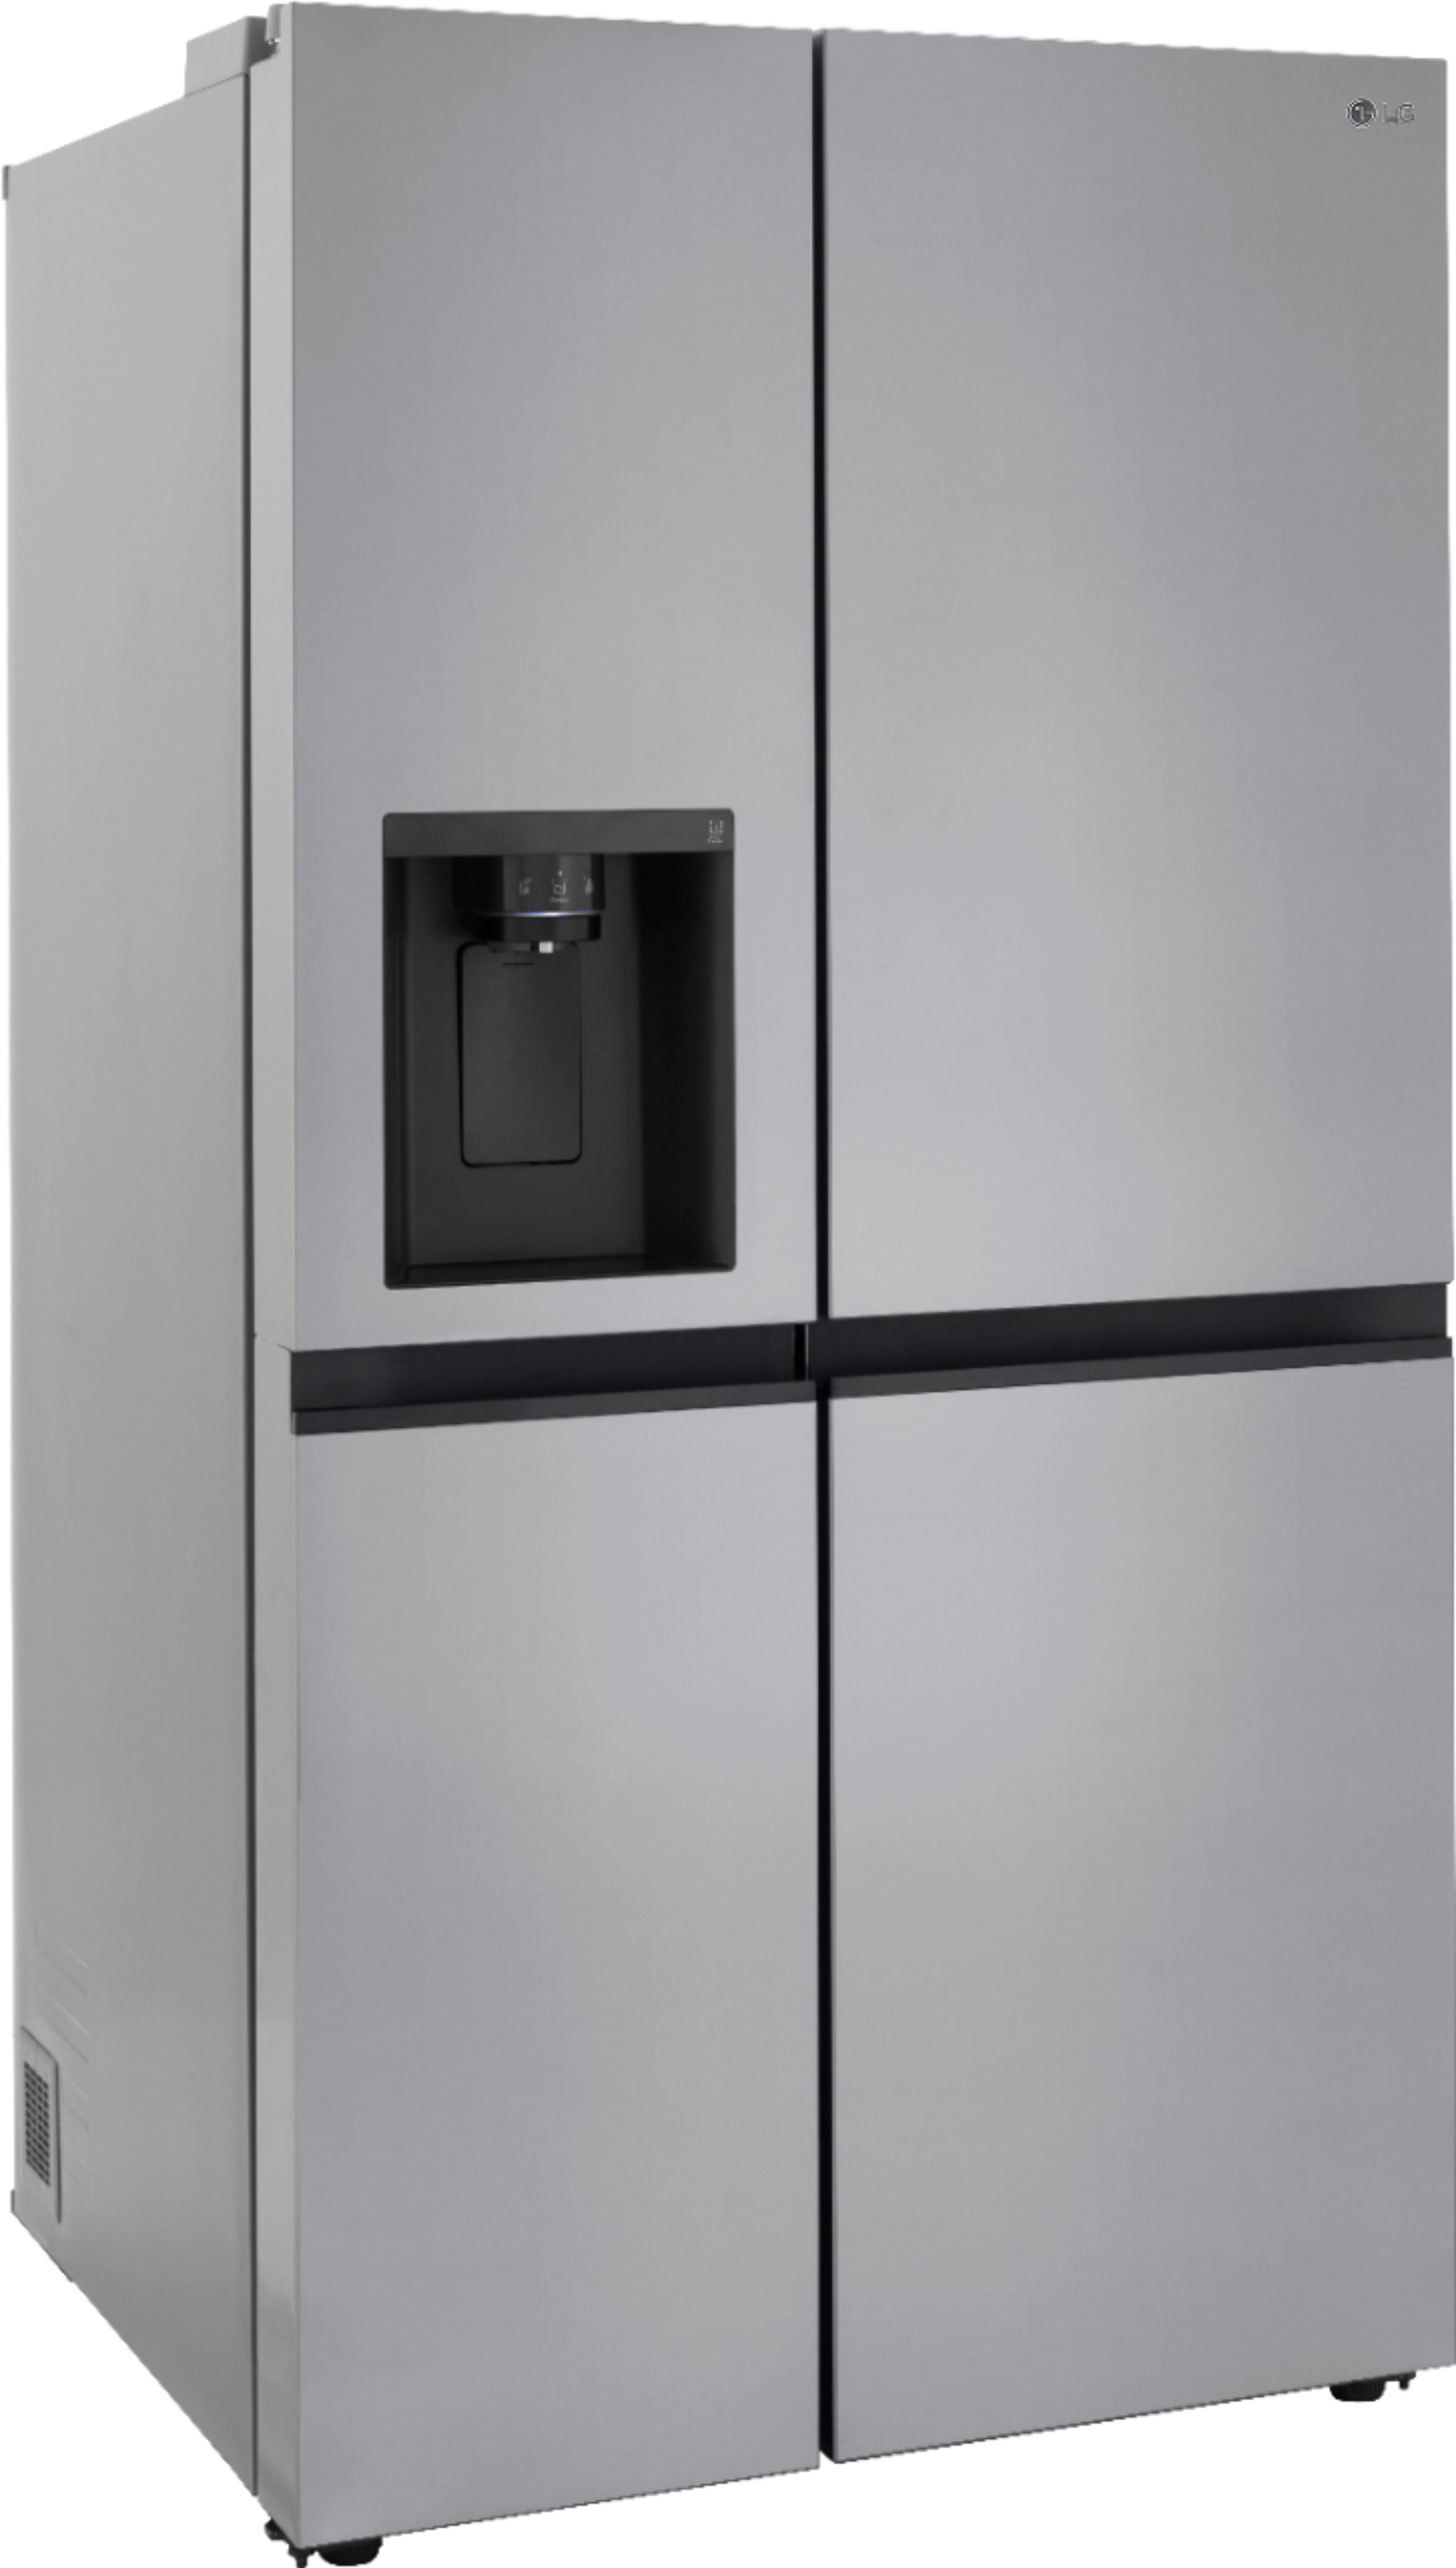 Angle View: LG - 27.2 Cu. Ft. Side-by-Side Refrigerator with SpacePlus Ice - Stainless Steel